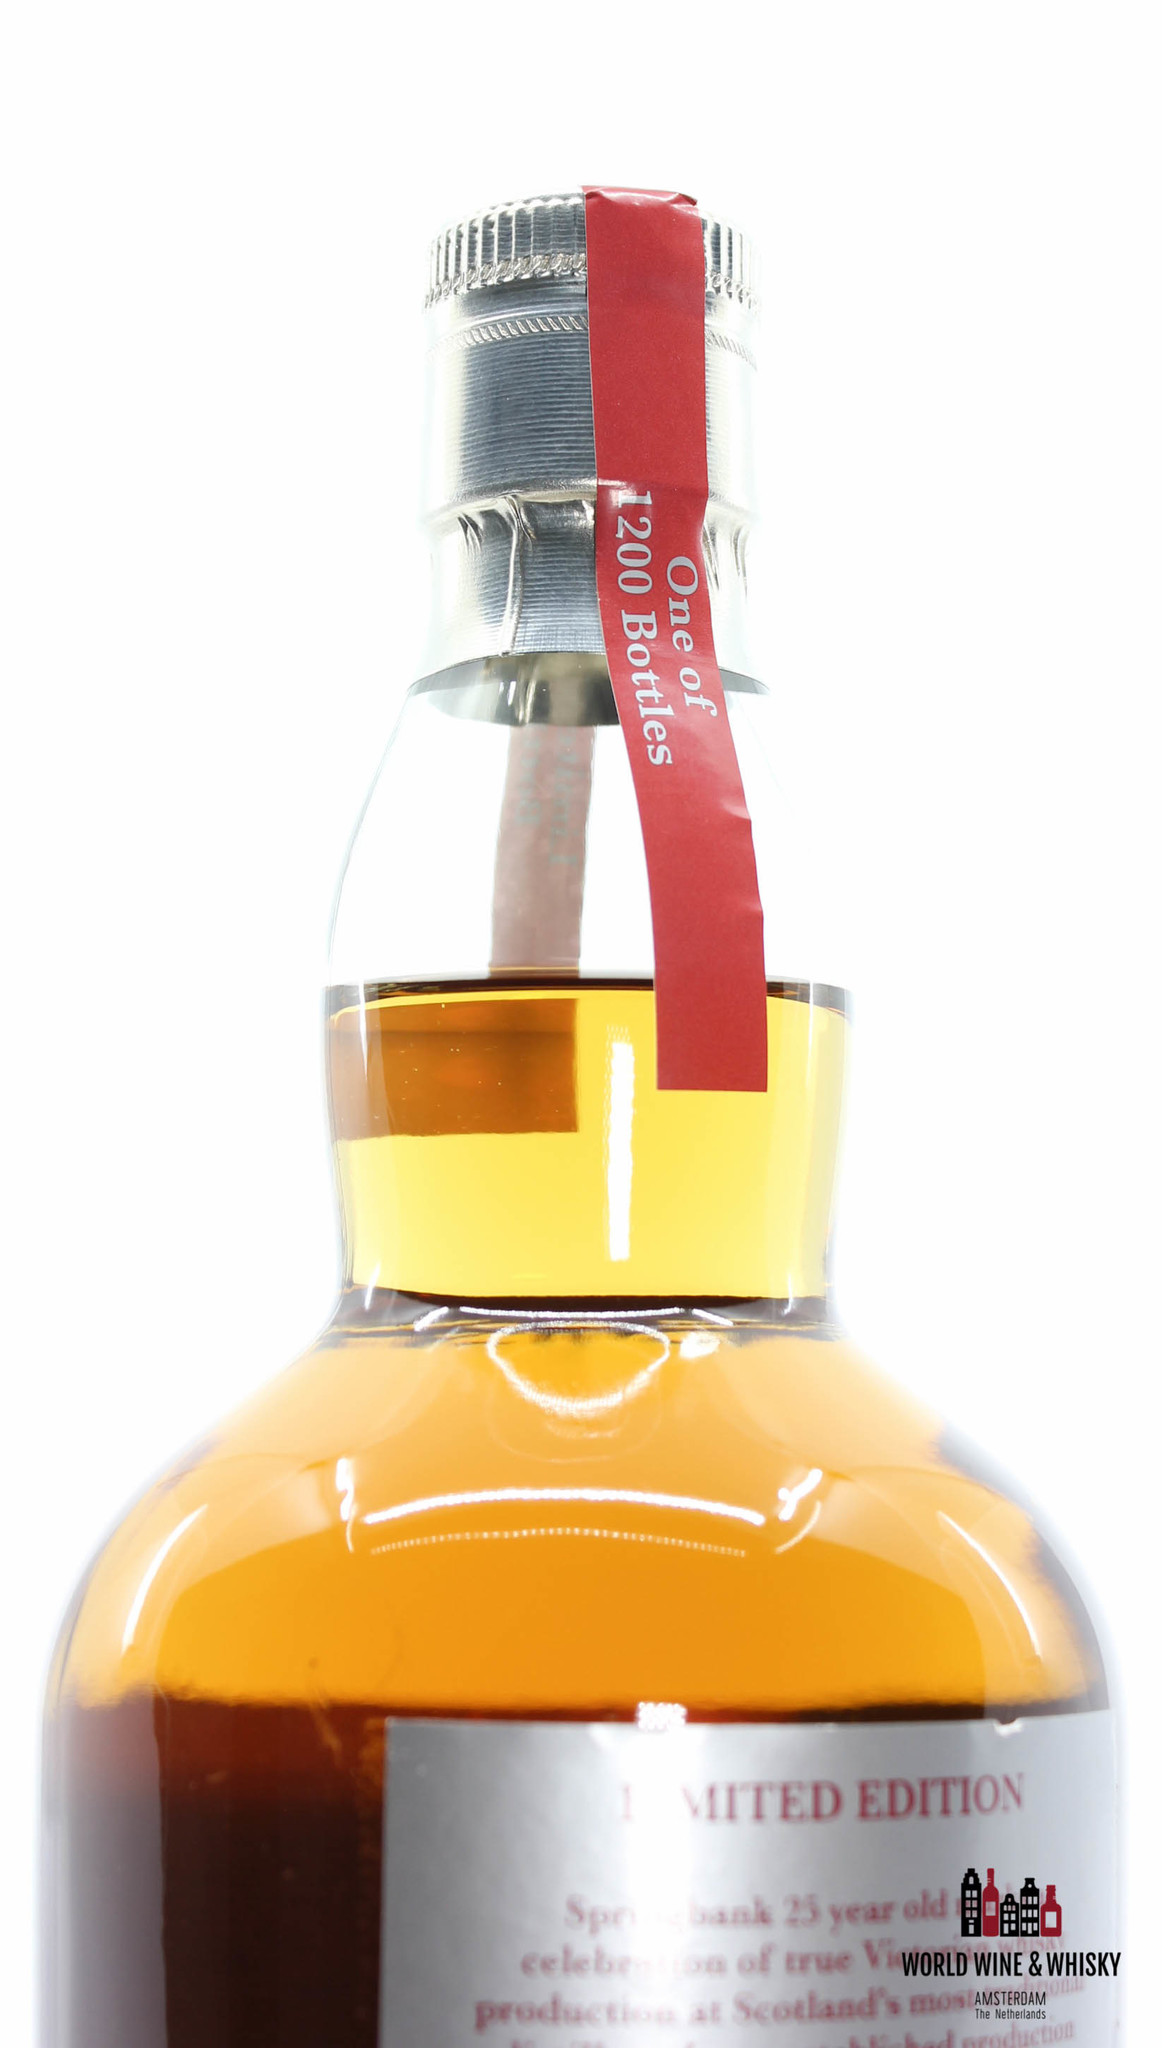 Springbank Springbank 25 Years Old 2020 Limited Edition 46% (one of 1200 bottles)